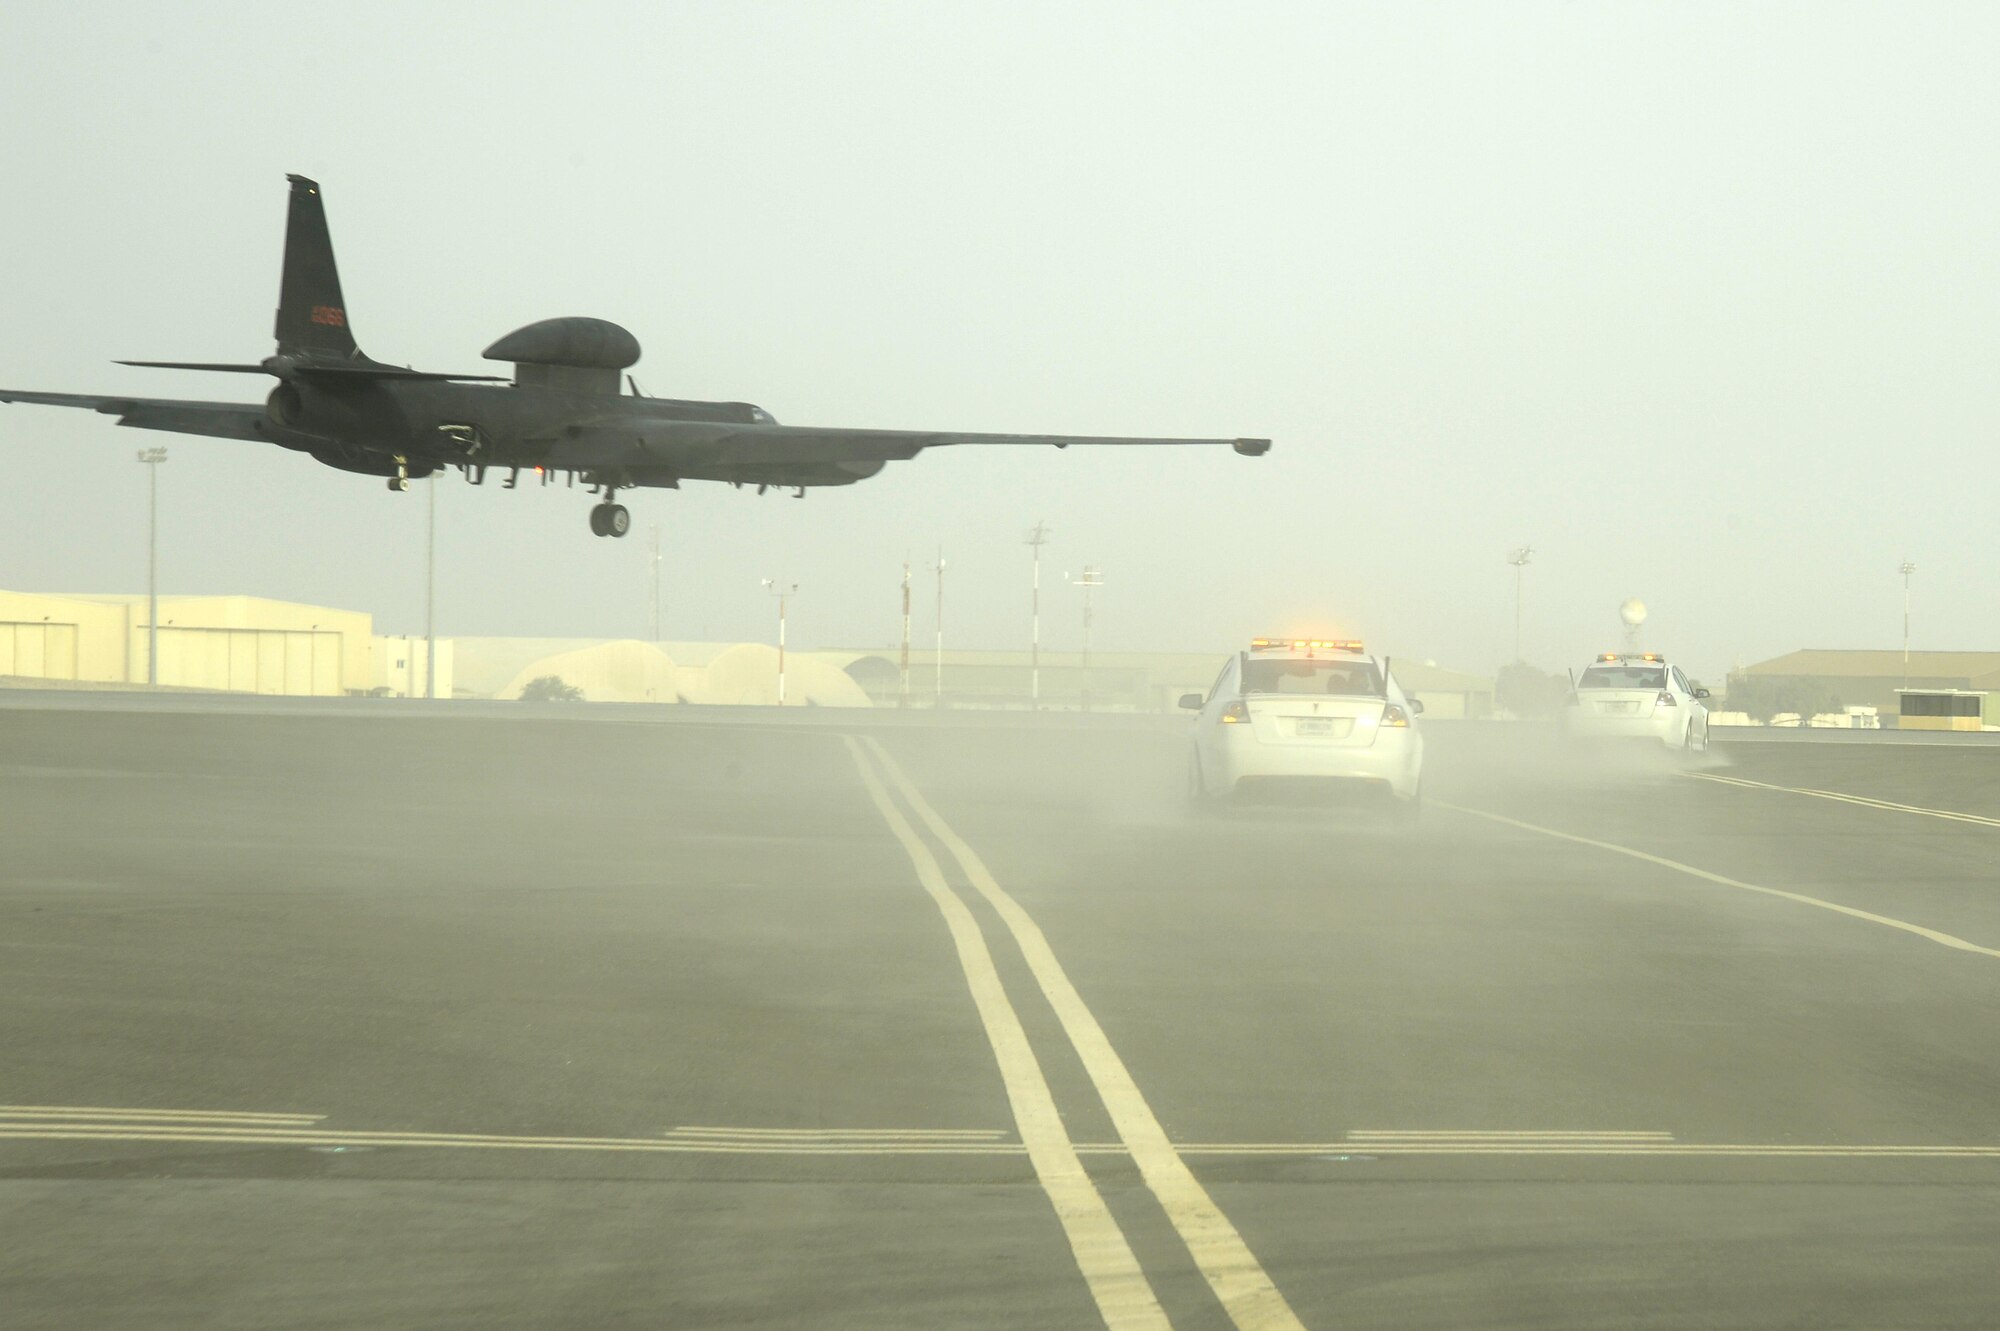 Chase cars prepare to catch a U-2 Dragon Lady as she comes in for a landing at an undisclosed location in Southwest Asia Feb. 9, 2015. The U-2 Dragon Lady provides high-altitude, all-weather surveillance and reconnaissance, day or night, in direct support of U.S. and allied forces. (U.S. Air Force photo/Tech. Sgt. Marie Brown